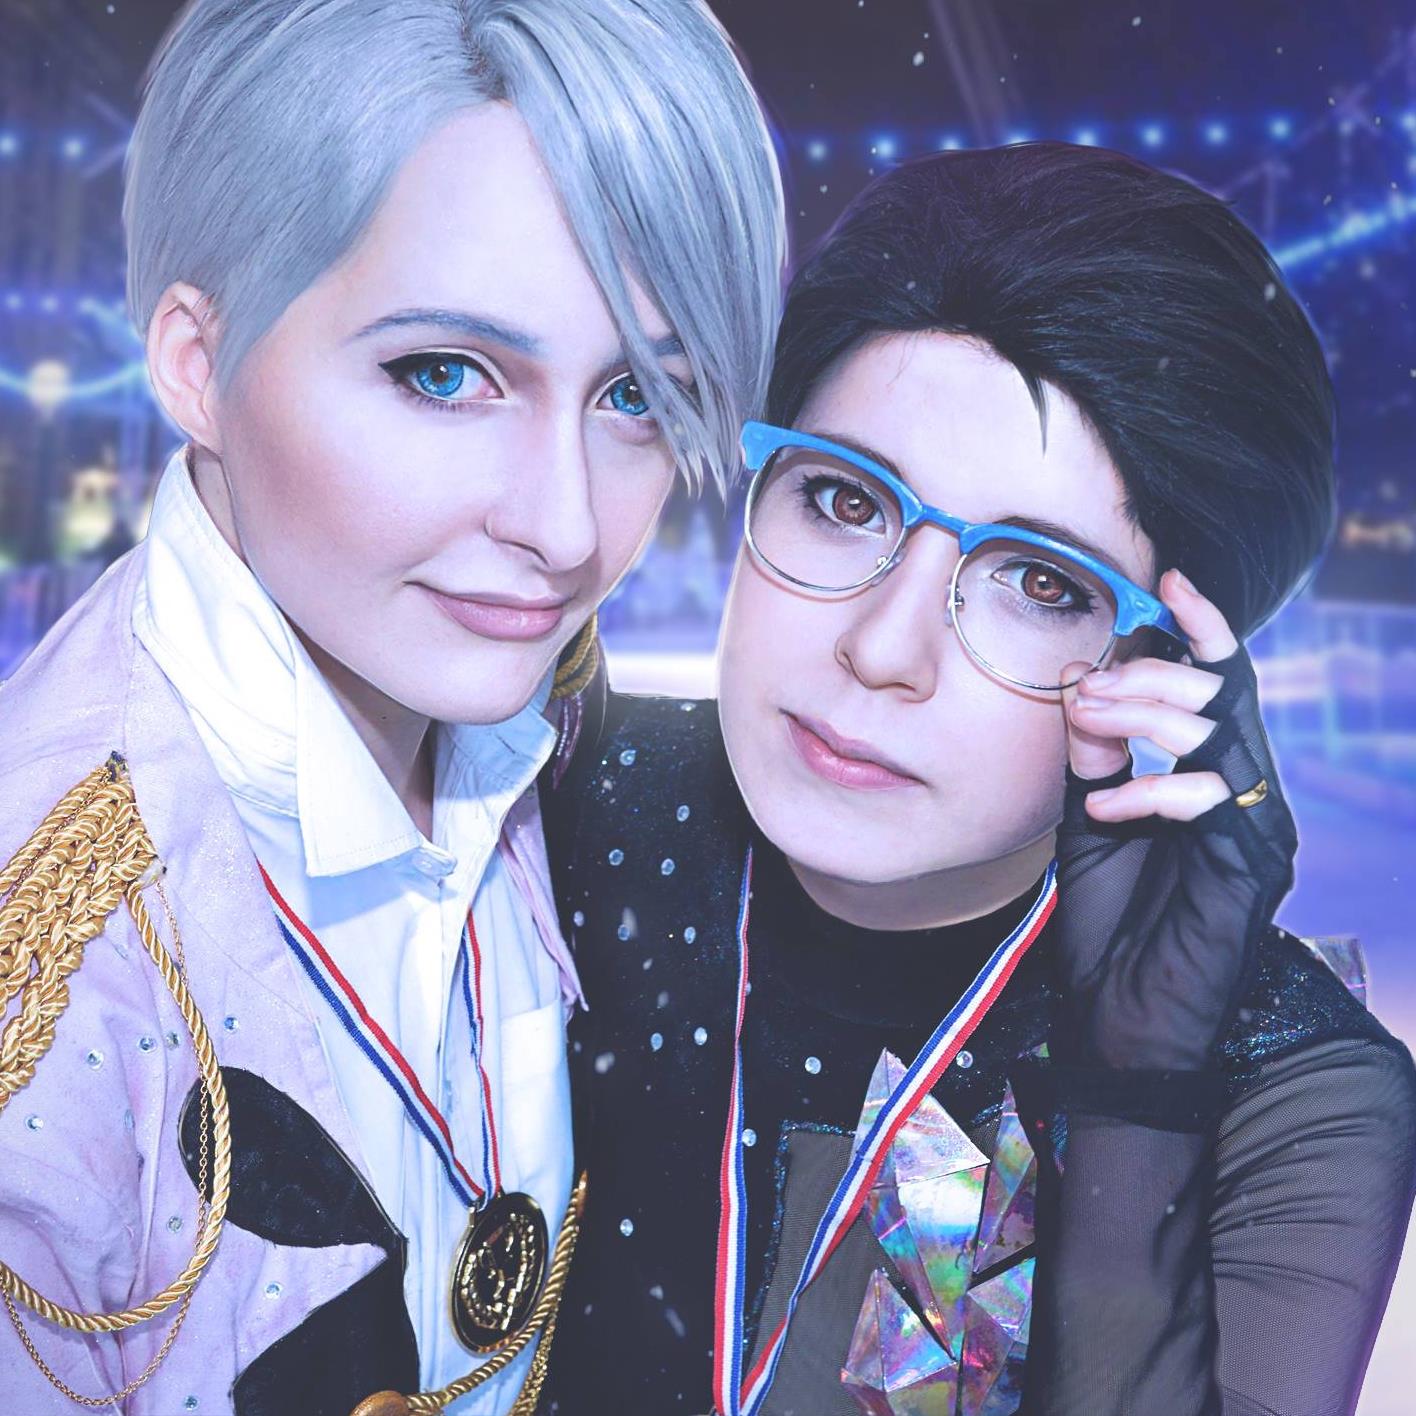 Pinstripe Cosplay cosplying Victor and Yurii from Yurii! on ice